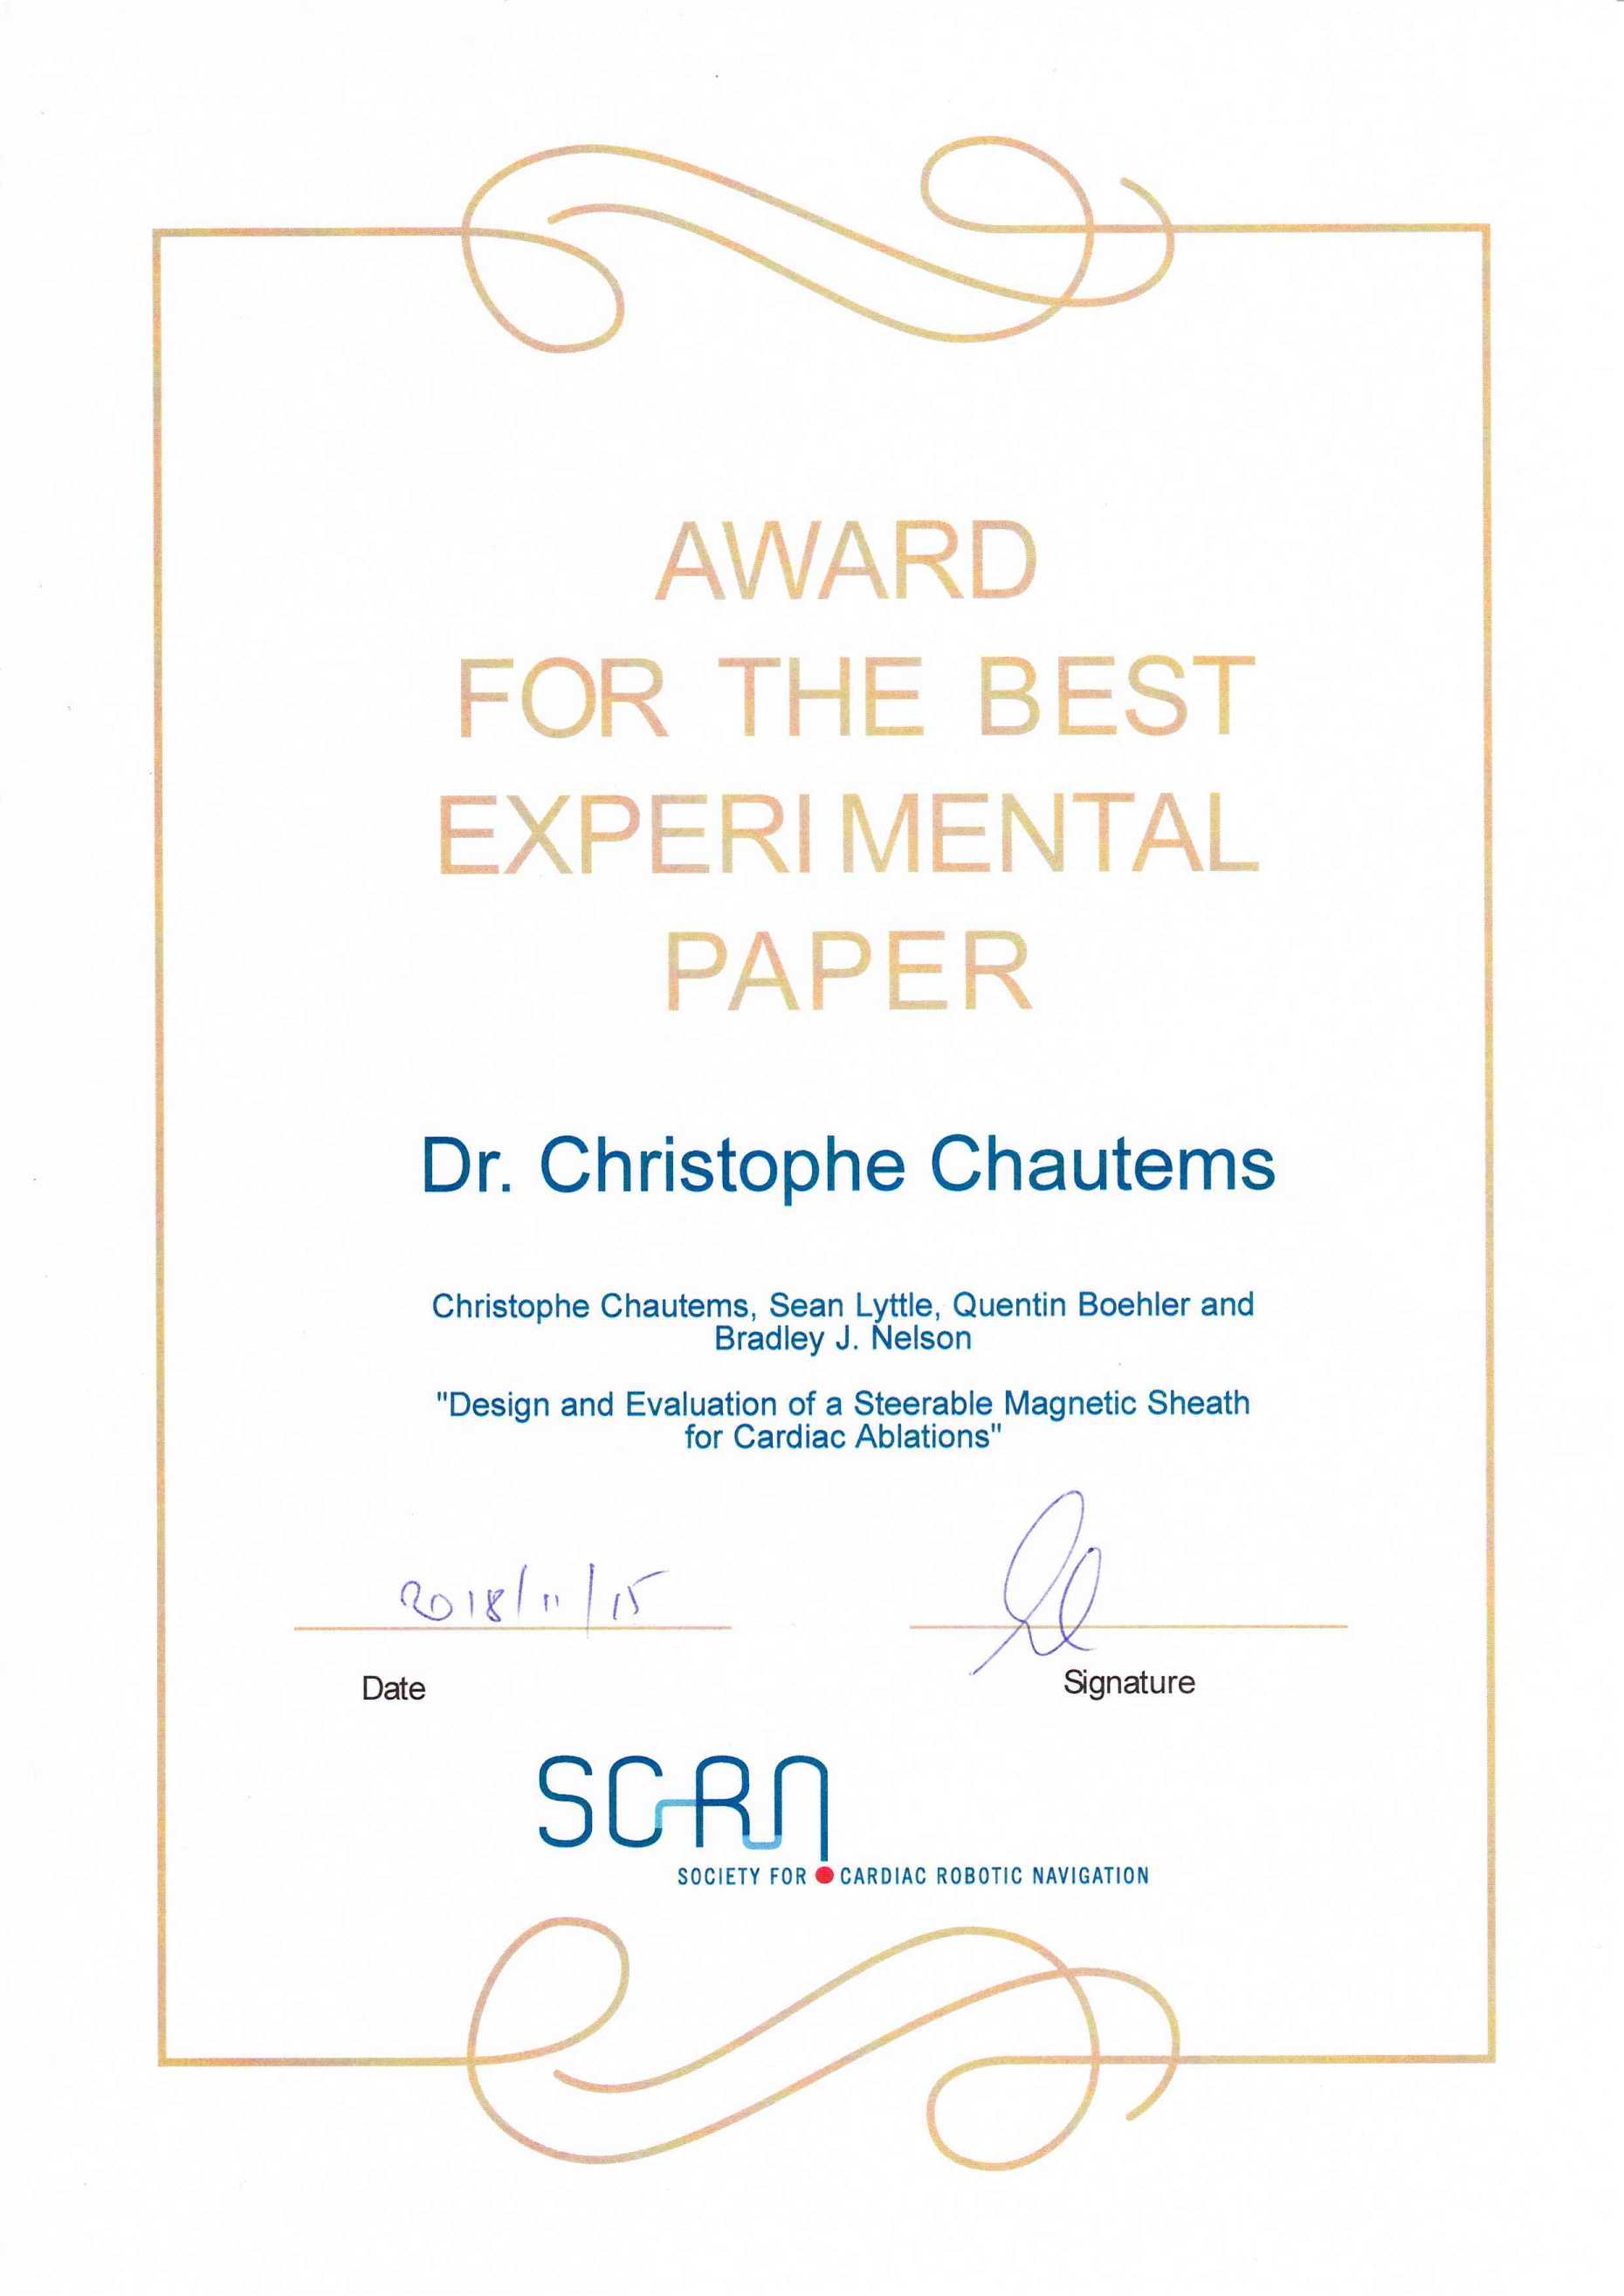 Award for the Best Experimental Paper